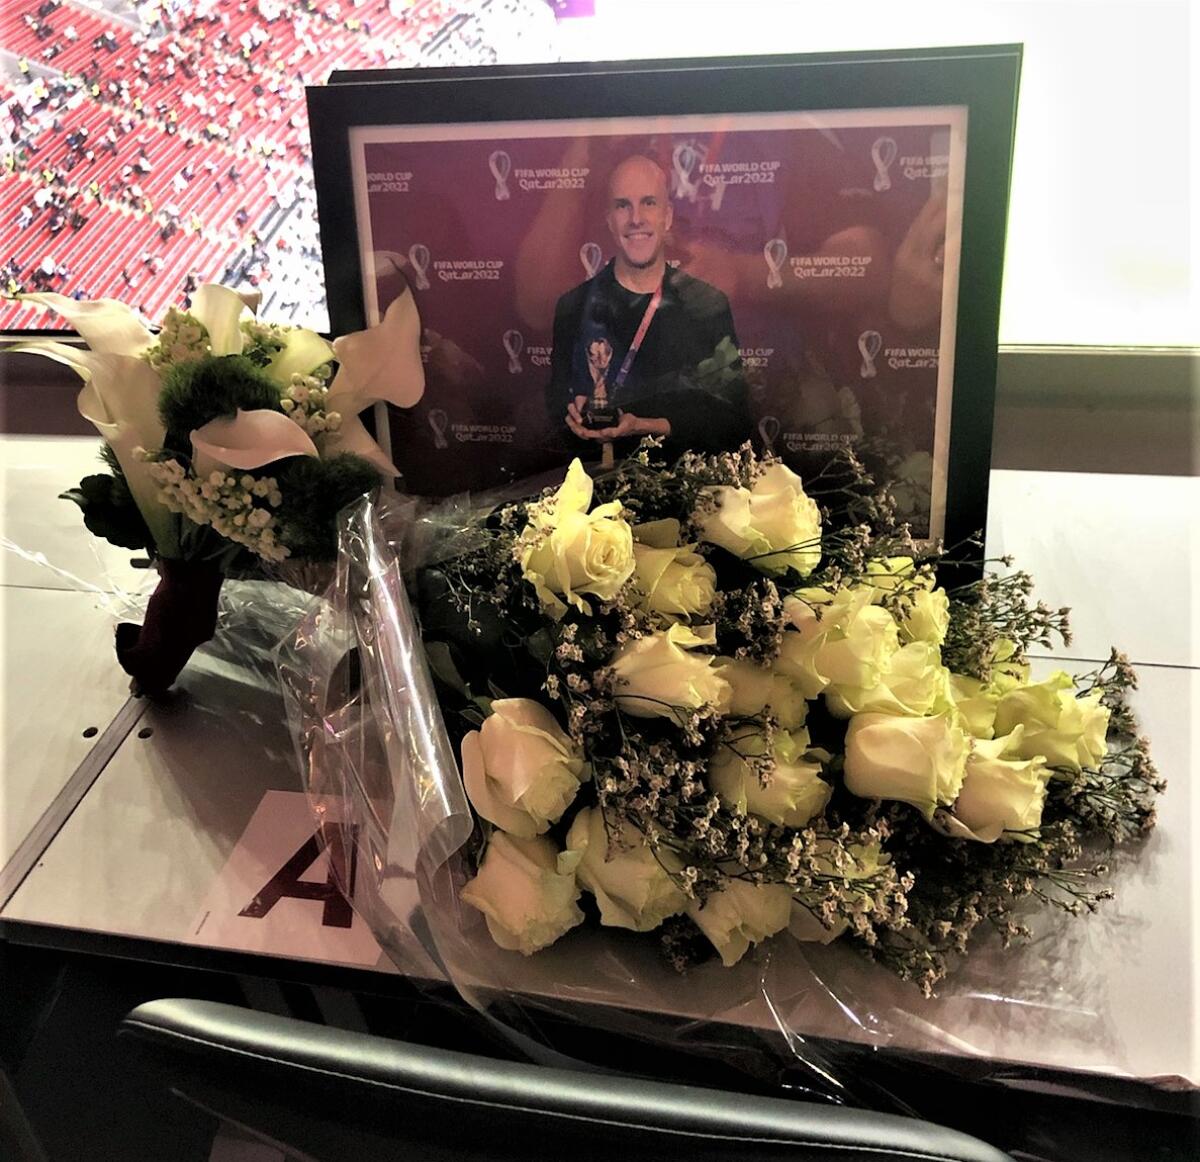 FIFA set up flowers and a photo honoring journalist Grant Wahl at his assigned World Cup seat.